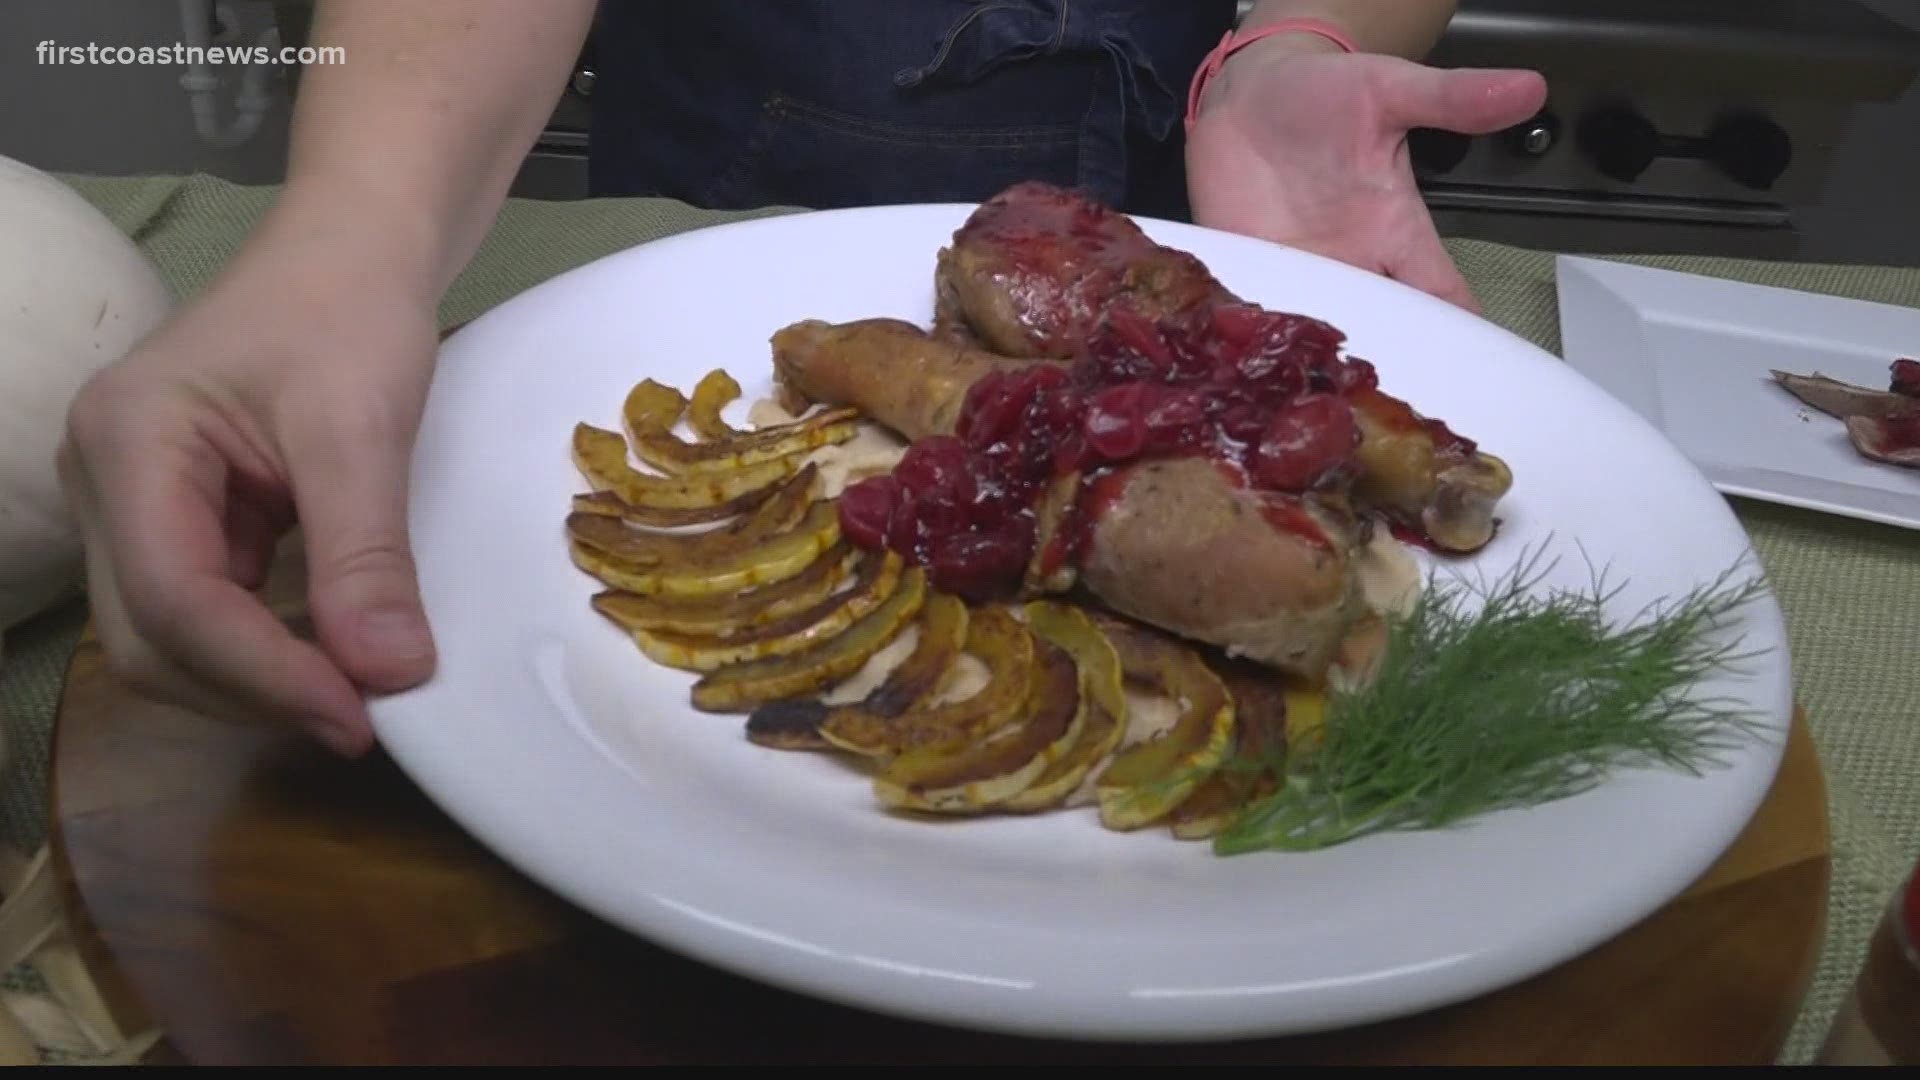 Chef Amadeus gives tips on how to serve up the perfect Thanksgiving meal.